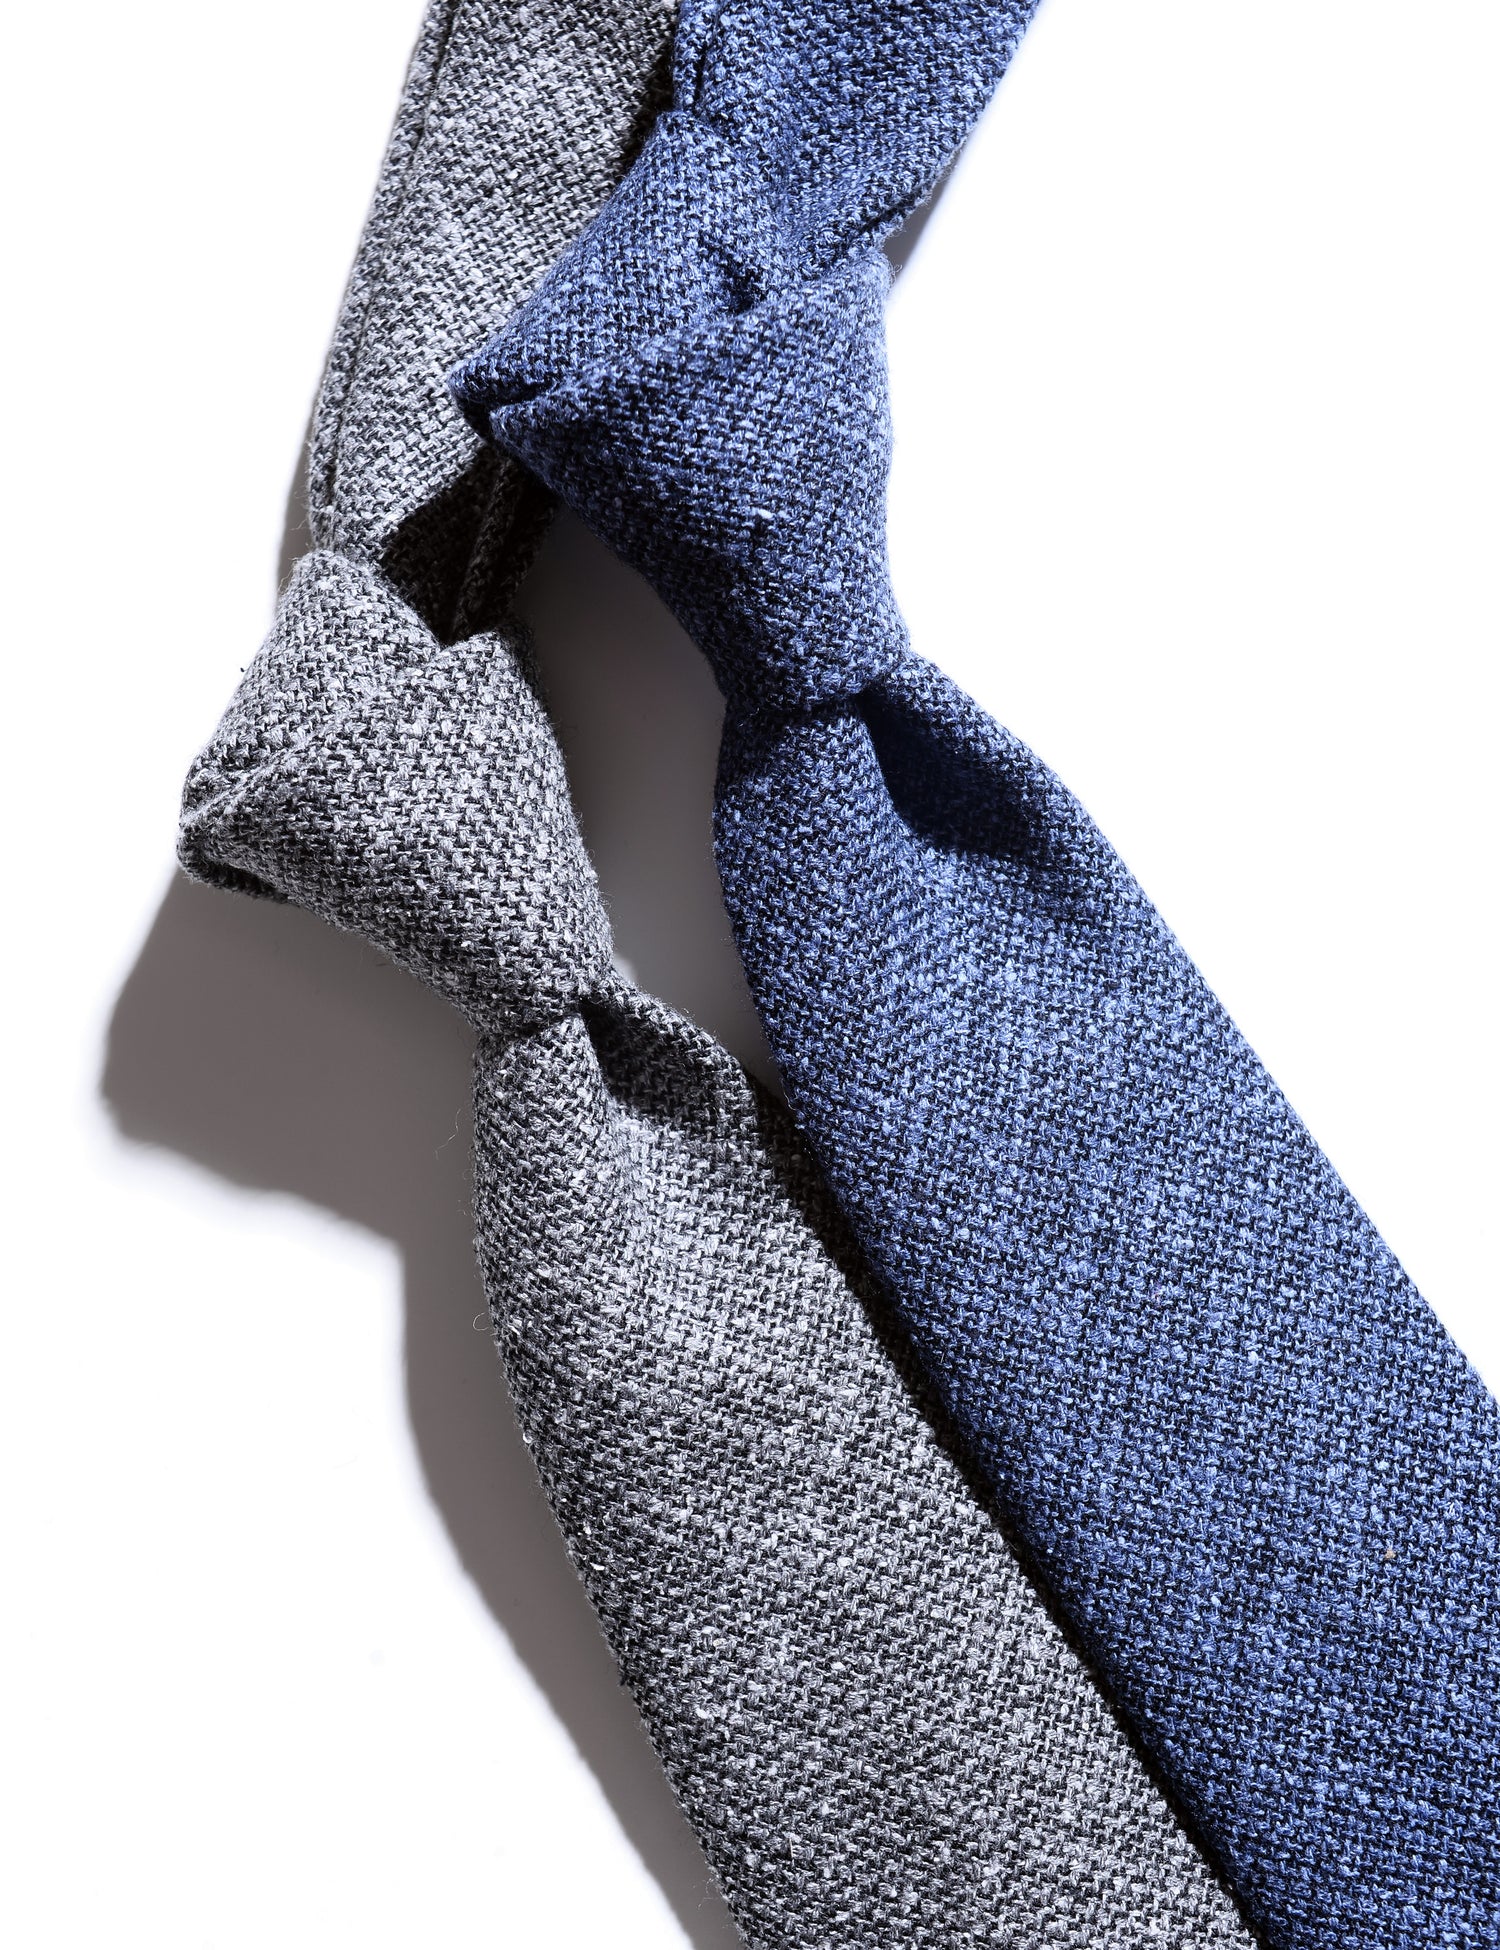 Close-up of Textured Wool Tie - Bluestone showing fabric texture